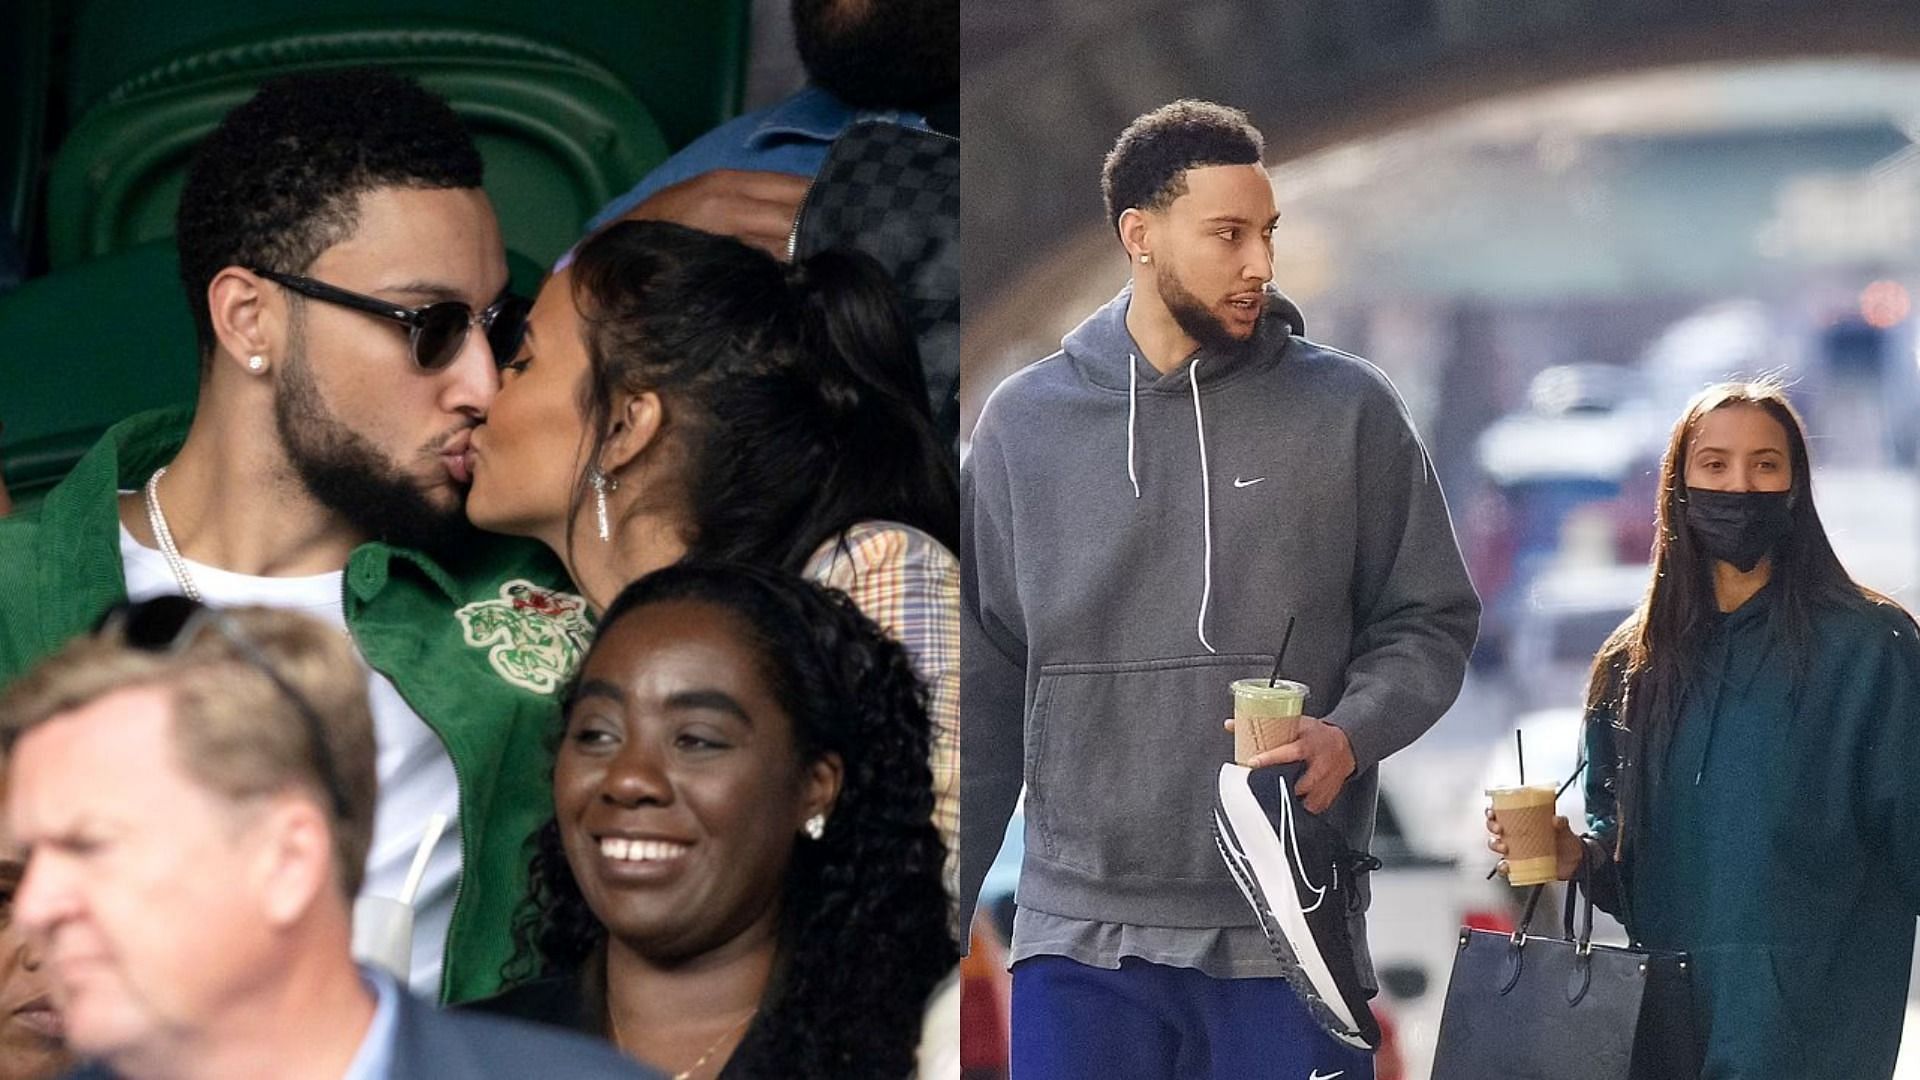 Maya Jama and Ben Simmons are engaged (Images via Getty and Daily Mail)